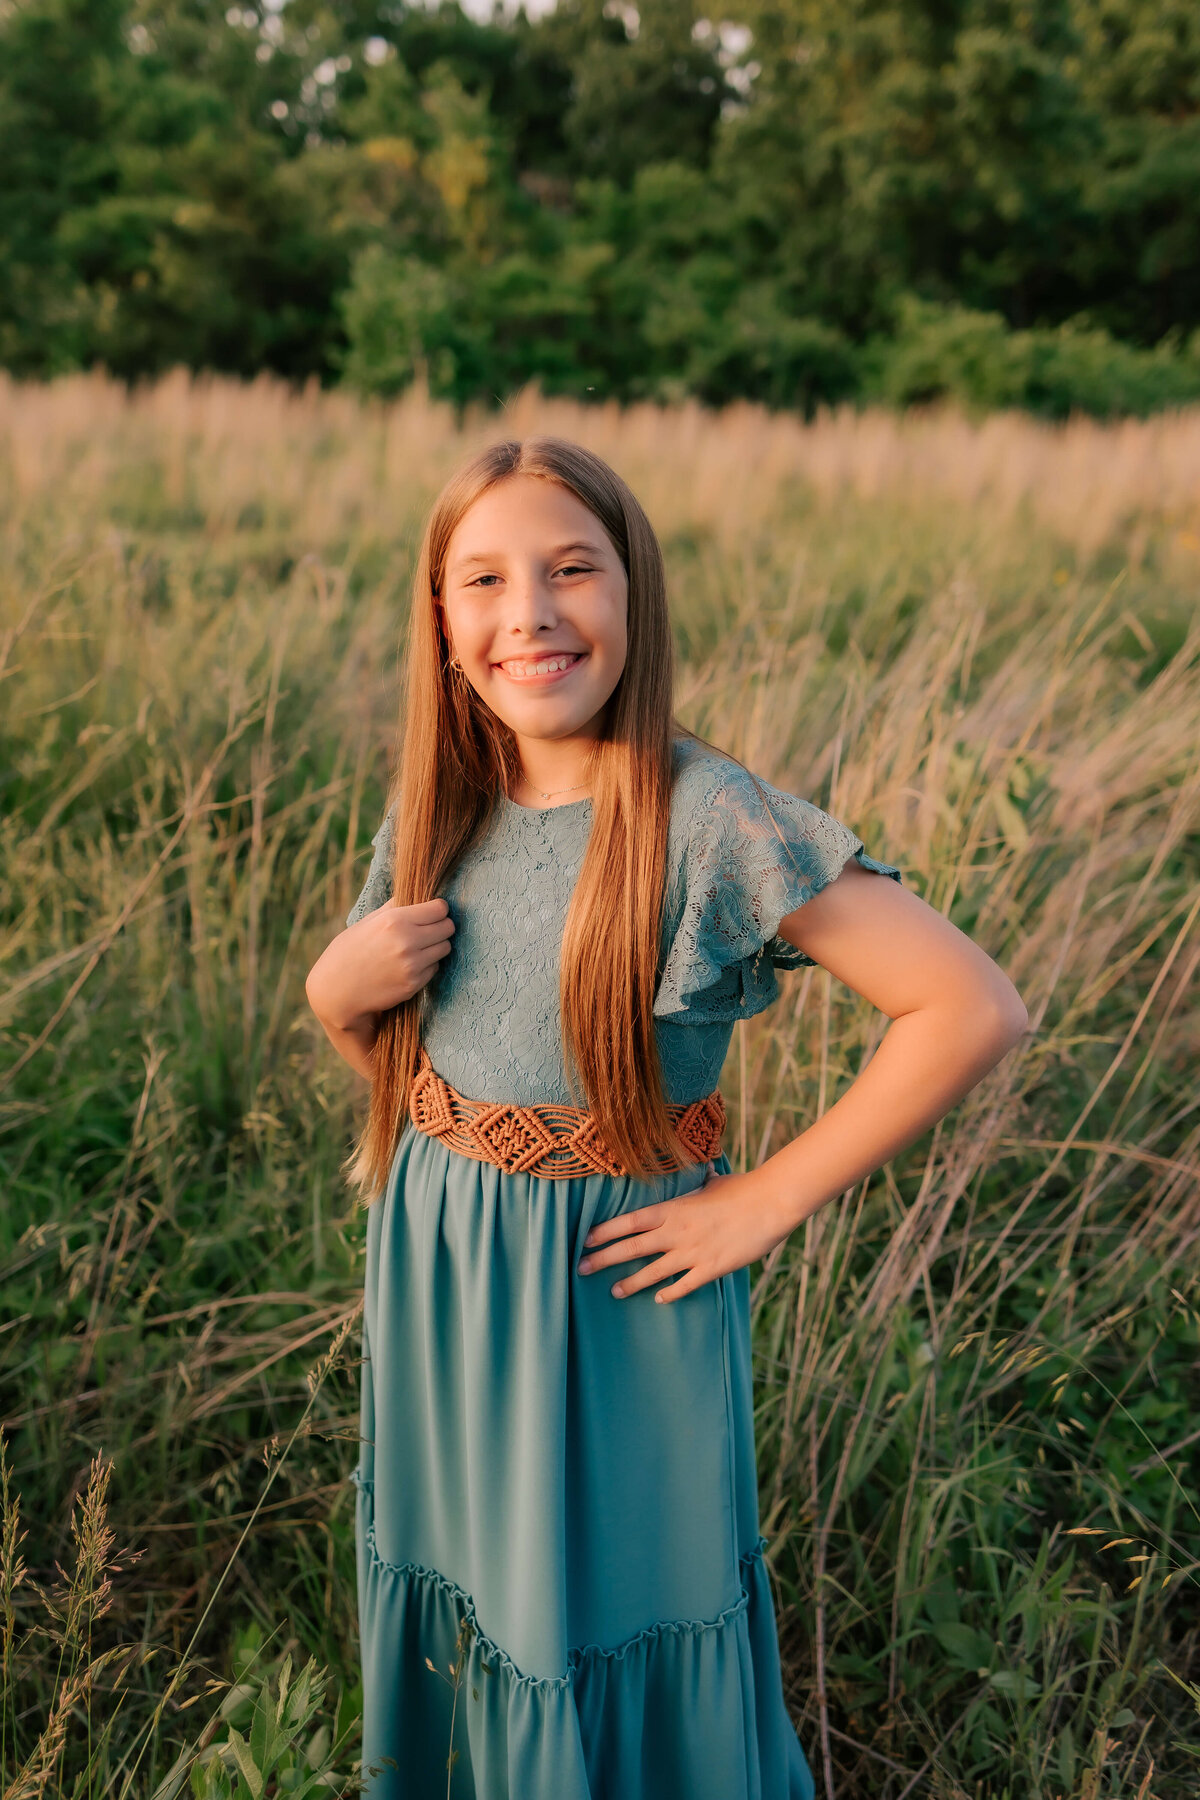 A young girl with long blonde hair is standing in the tall grassy field smiling at Foppiano Photograhy while she captures the beauty of her youth at sunset.